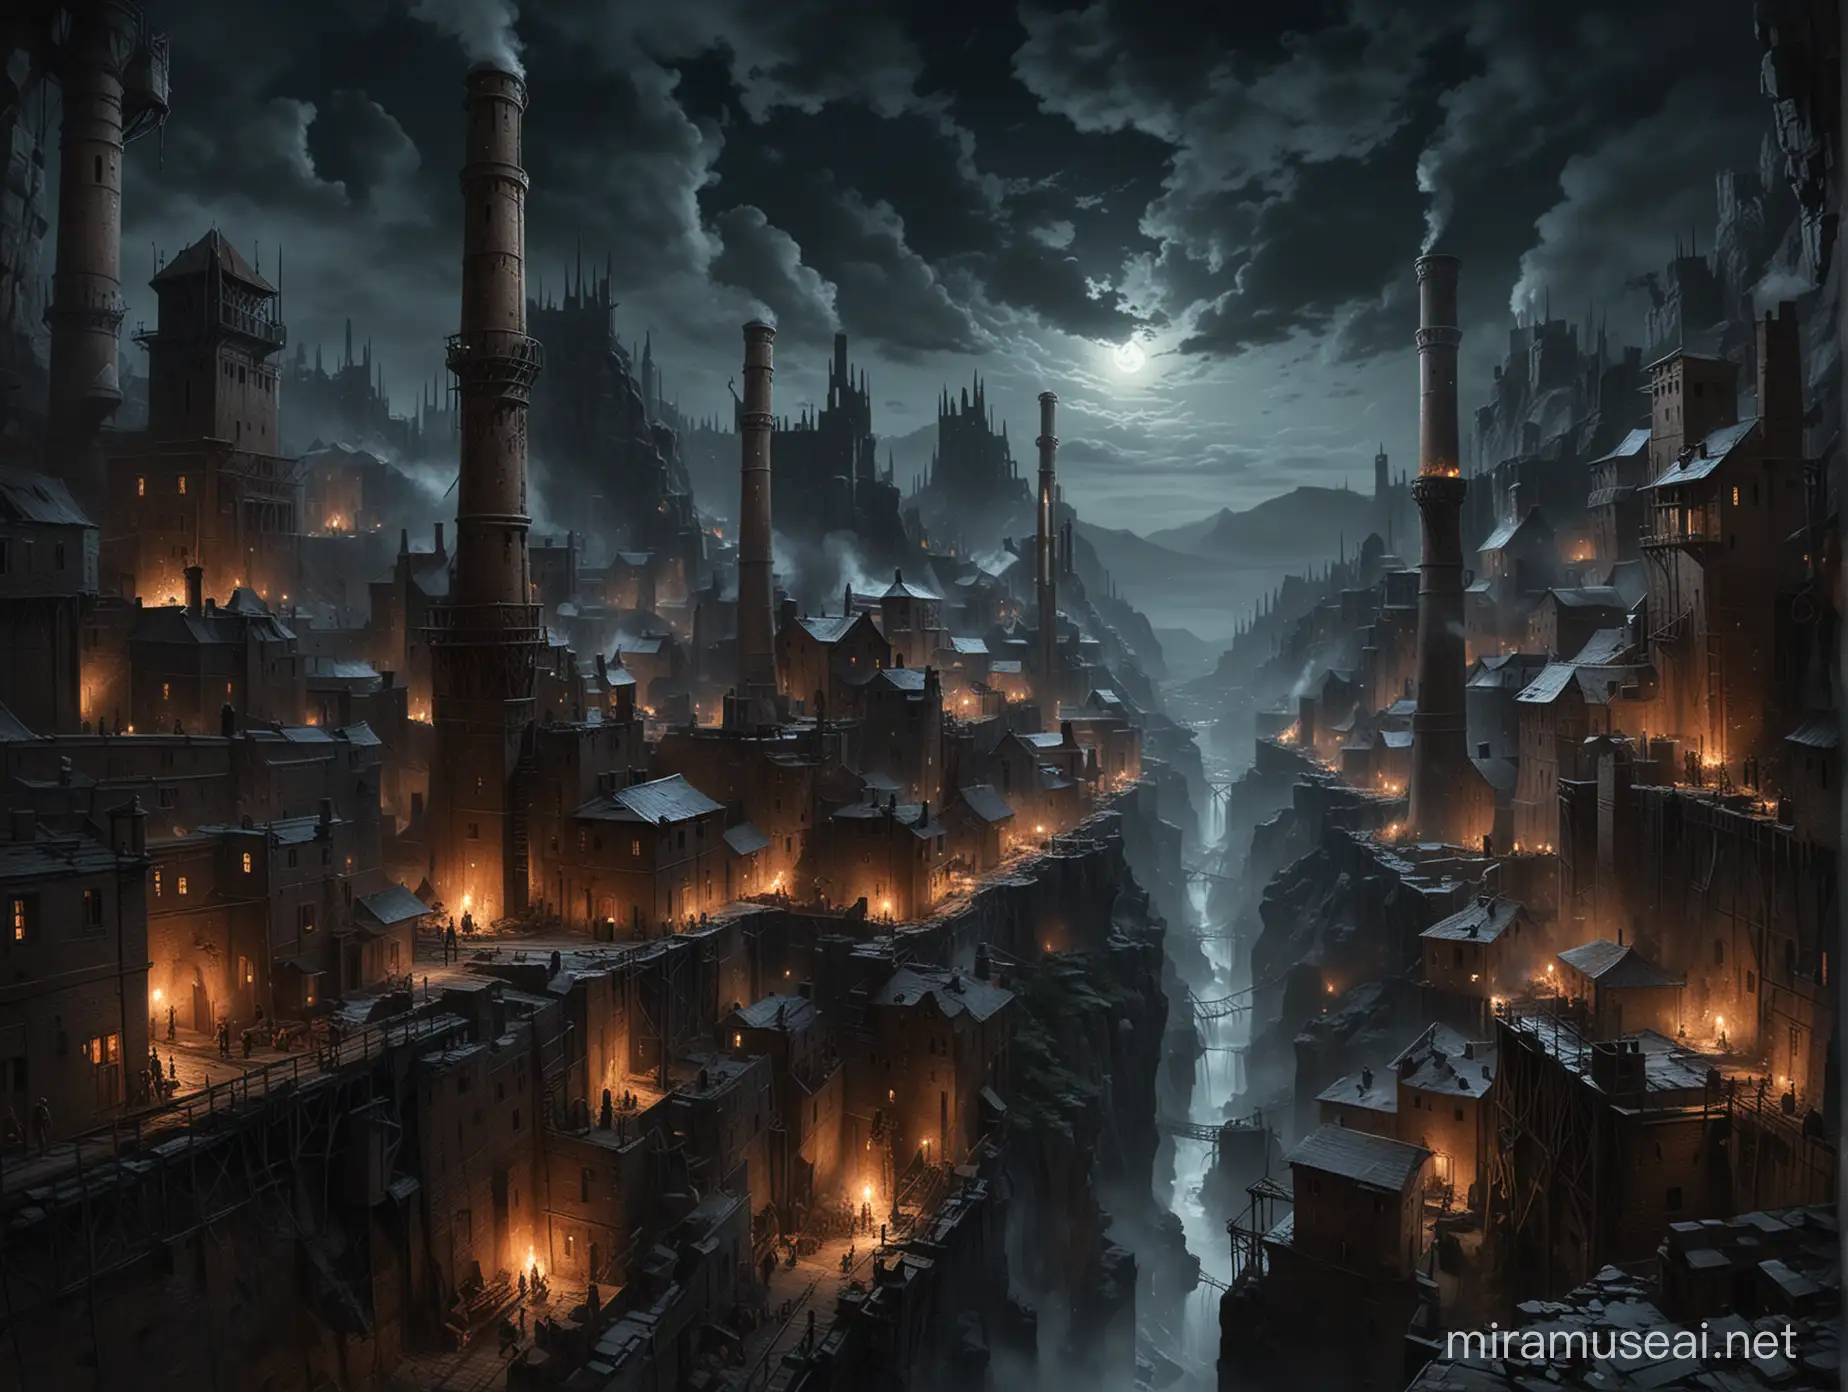 medieval, beautiful, gothic, industrial, smoke stacks, intricate, deep ravine at night, The sky is barely visible from the bottom, The ravine walls are lined with endless tightly packed buildings, They extend far above, canyon-like urban landscape, darkness obscures the bottom of the ravine, mystery, depth, poor, poverty, dark, imposing, oil painting, bold brush strokes, impressionist style